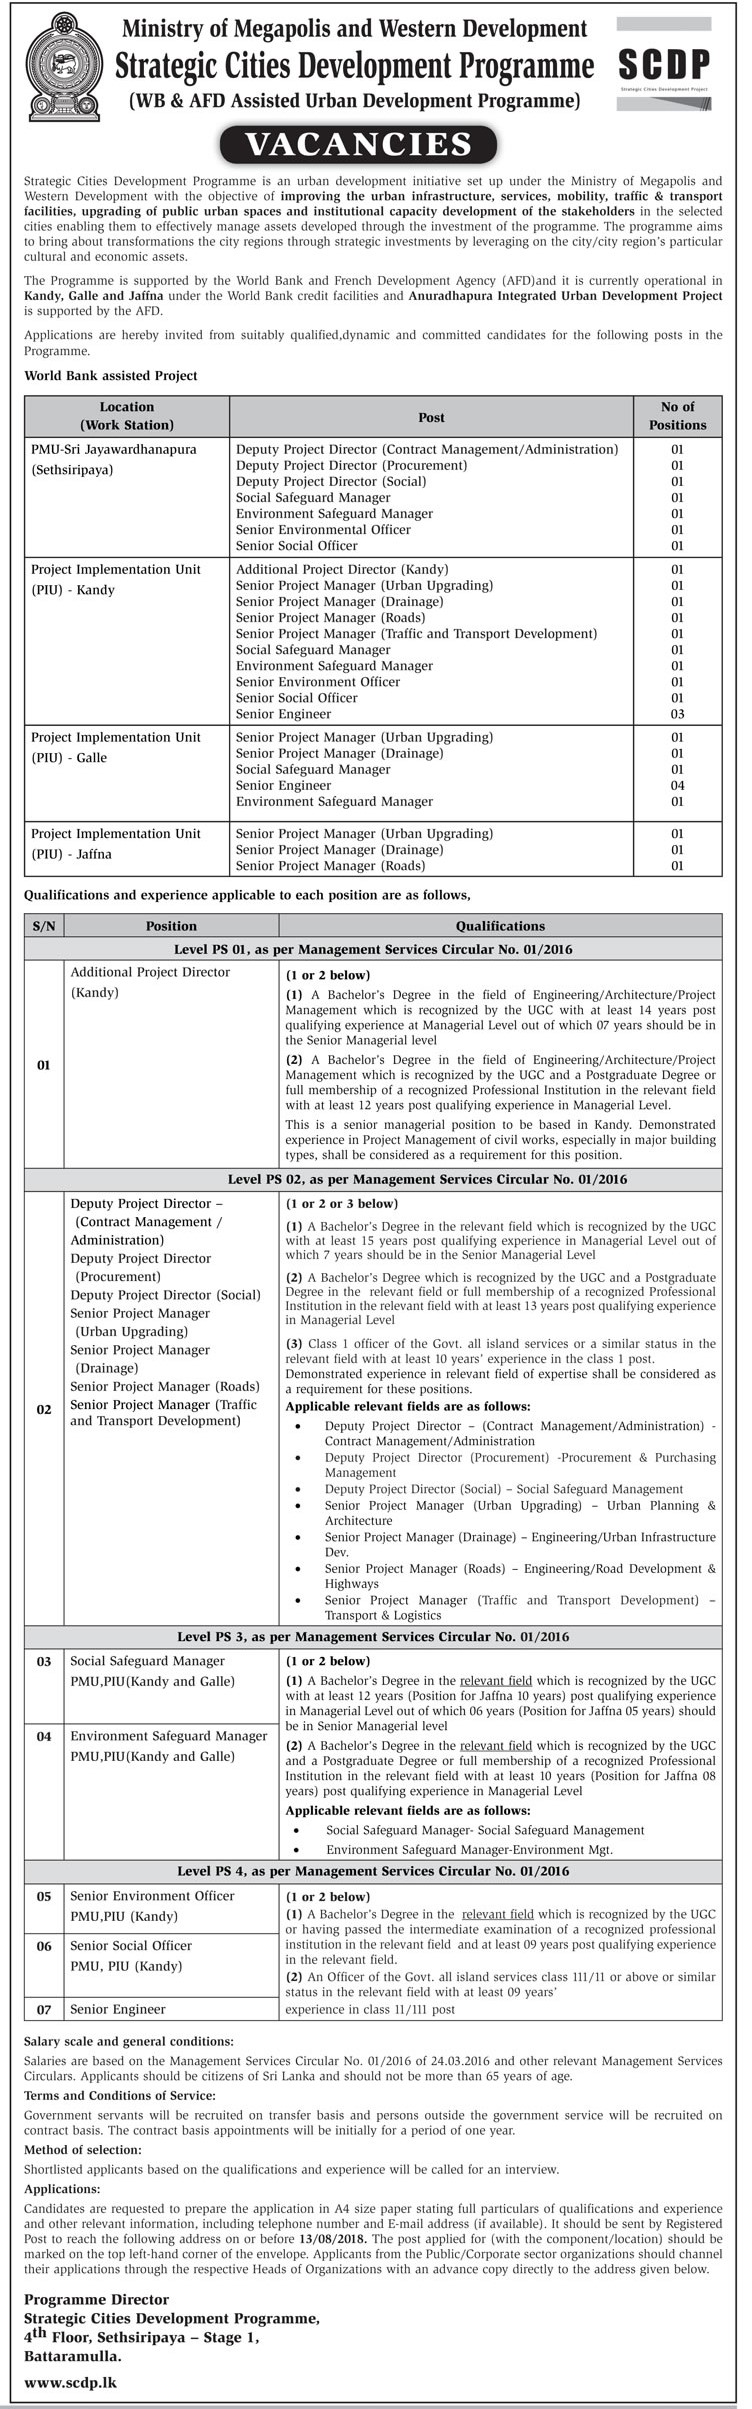 Environment Officer / Social Officer / Additional Project Director / Project Manager / Engineer - Ministry of Megapolis Jobs Vacancies